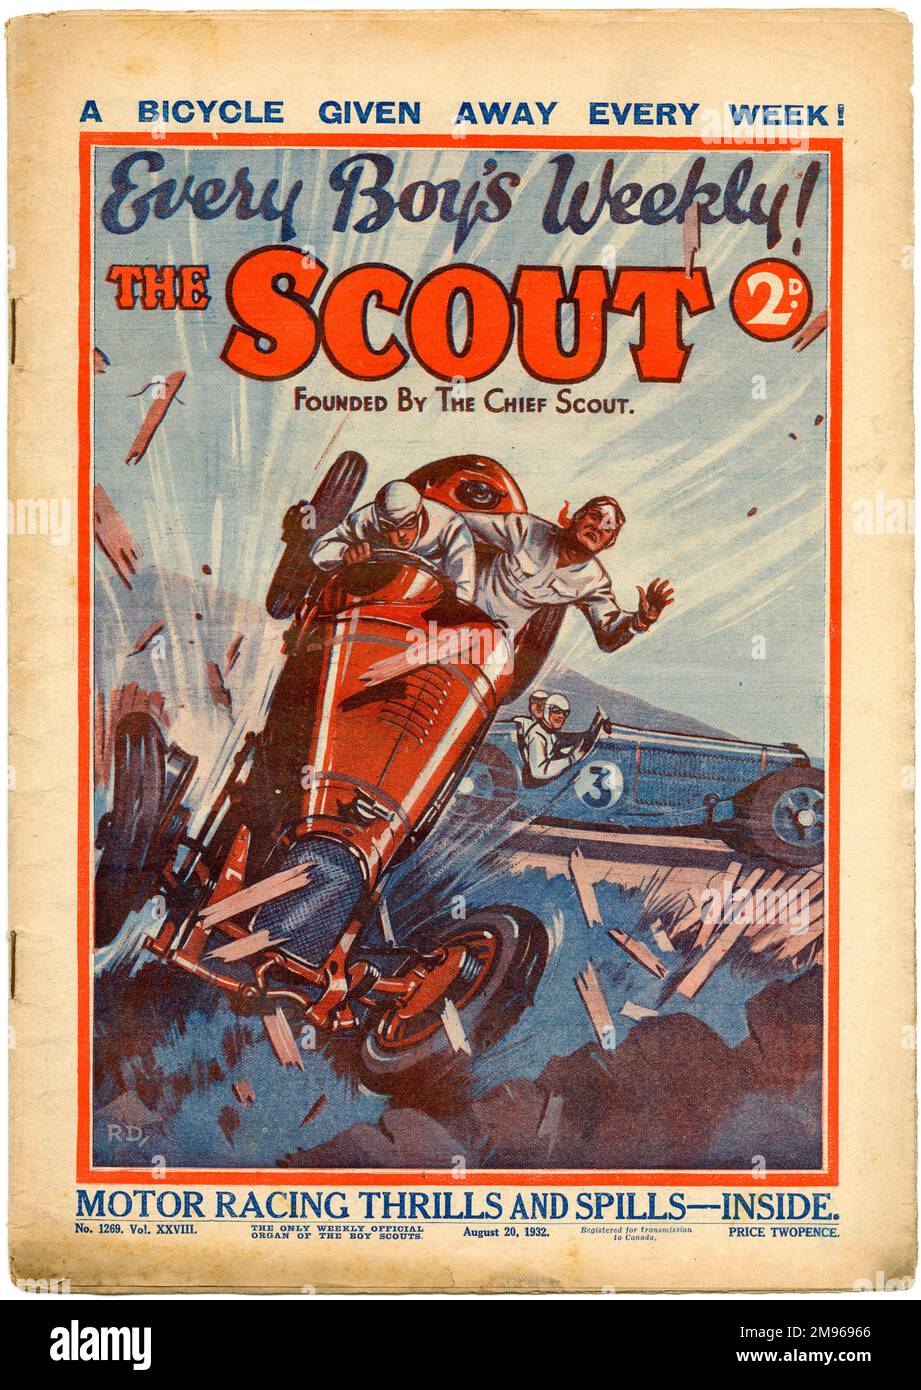 Front cover of The Scout magazine showing a rather calamitous motor racing crash, with more "motor racing thrills and spills" promised inside. Stock Photo